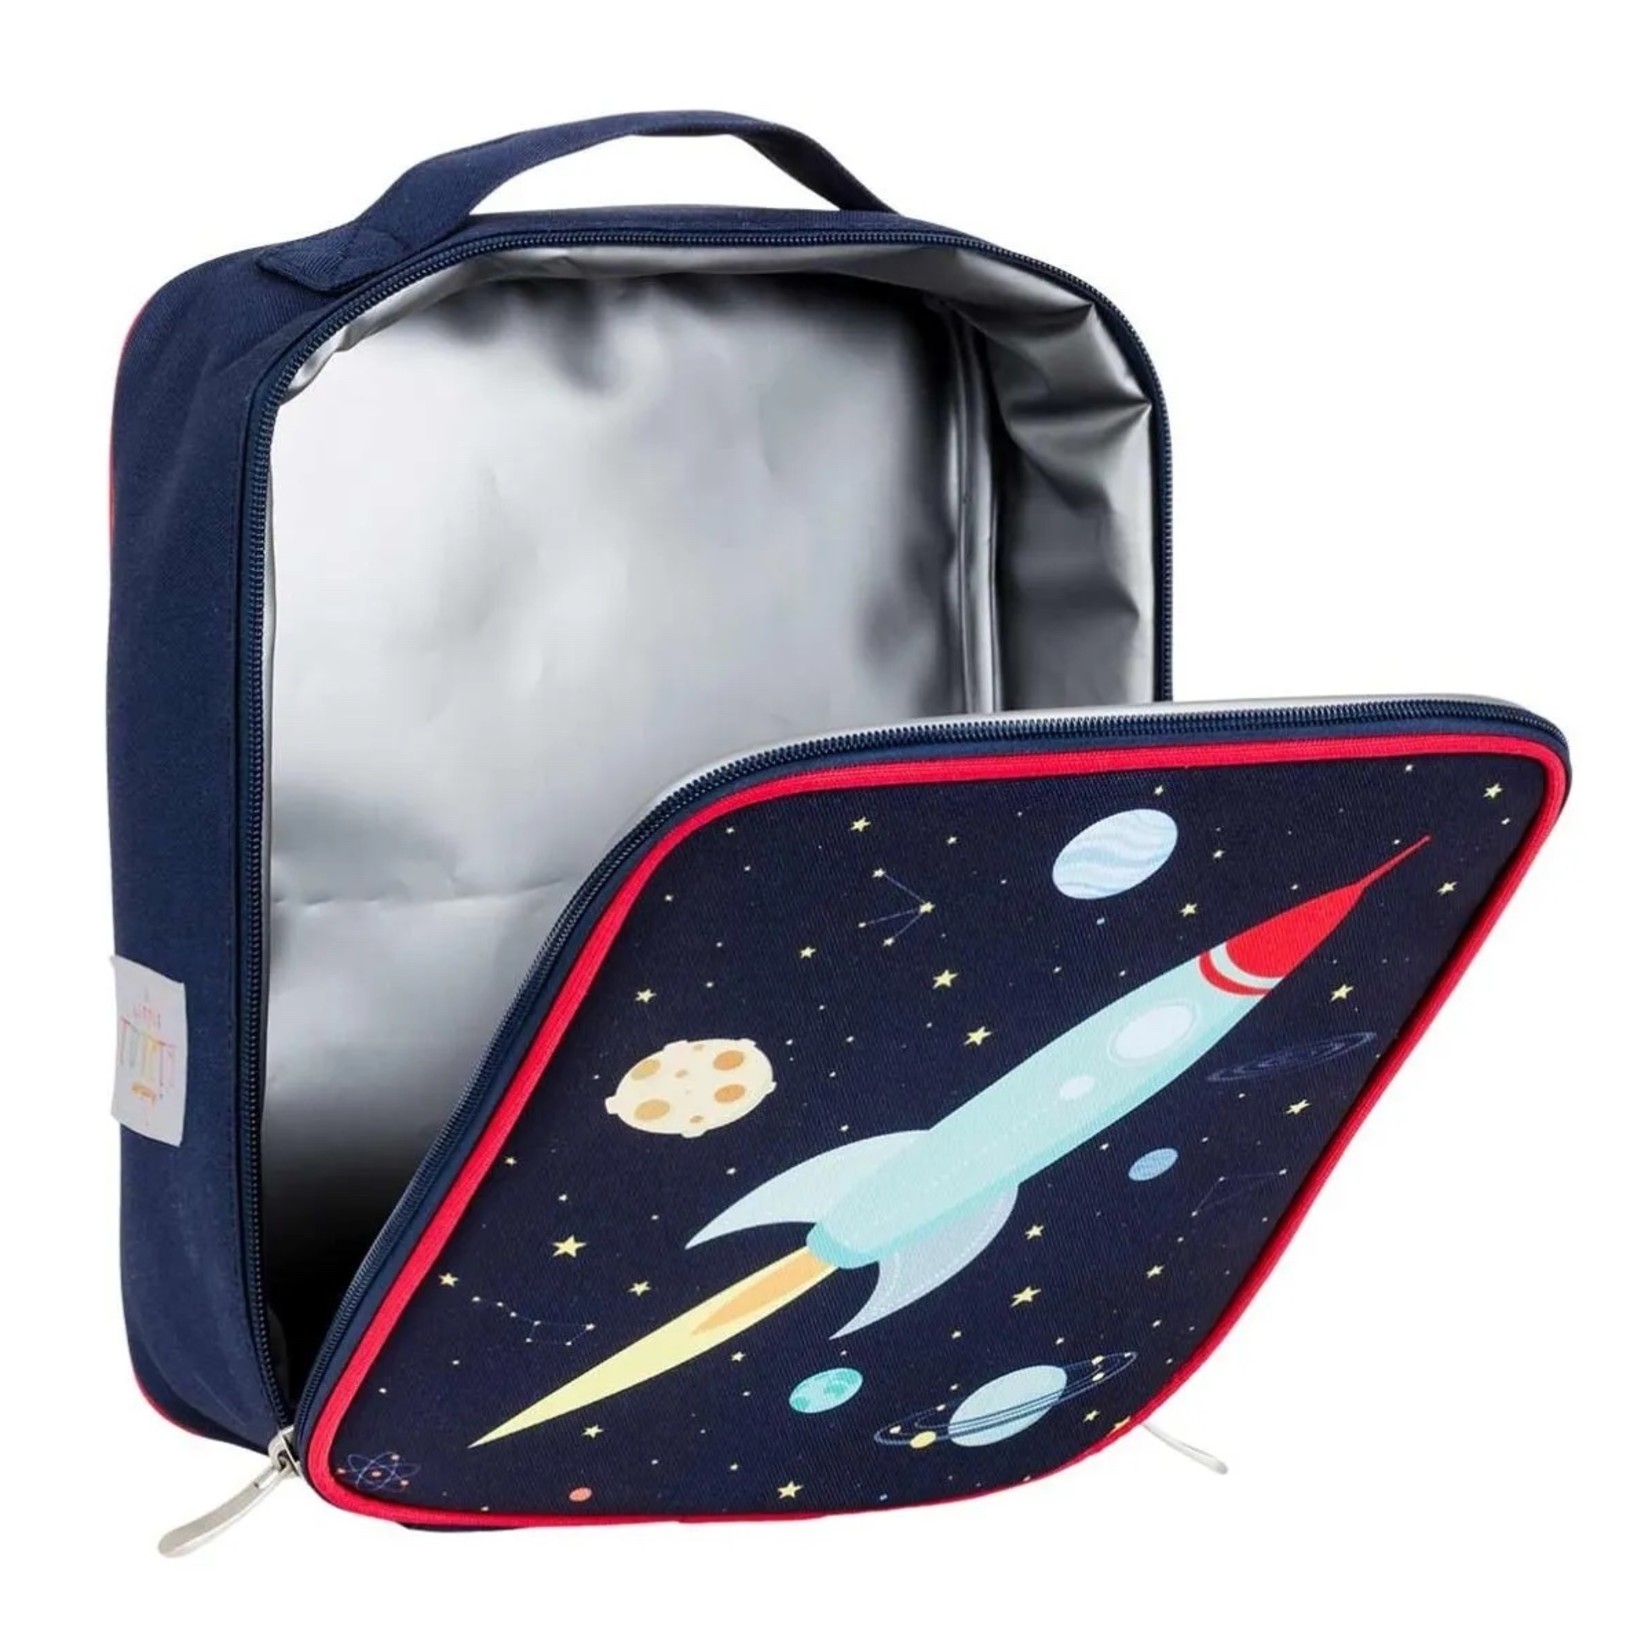 A LITTLE LOVELY COMPANY COOL BAG/LUNCH BAG: SPACE